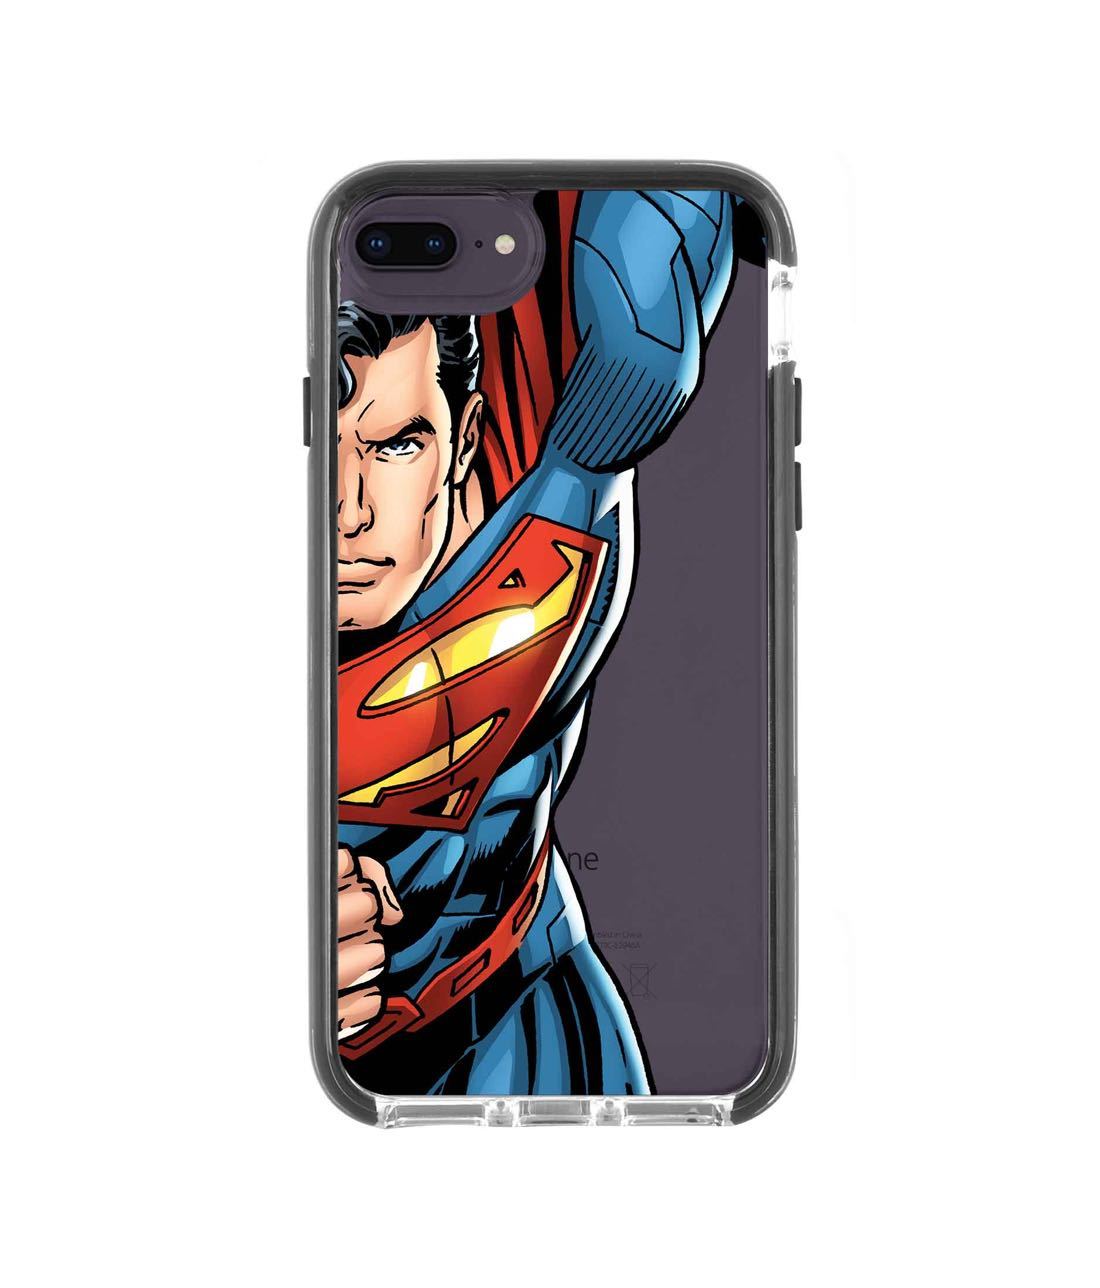 Speed it like Superman - Extreme Phone Case for iPhone 8 Plus